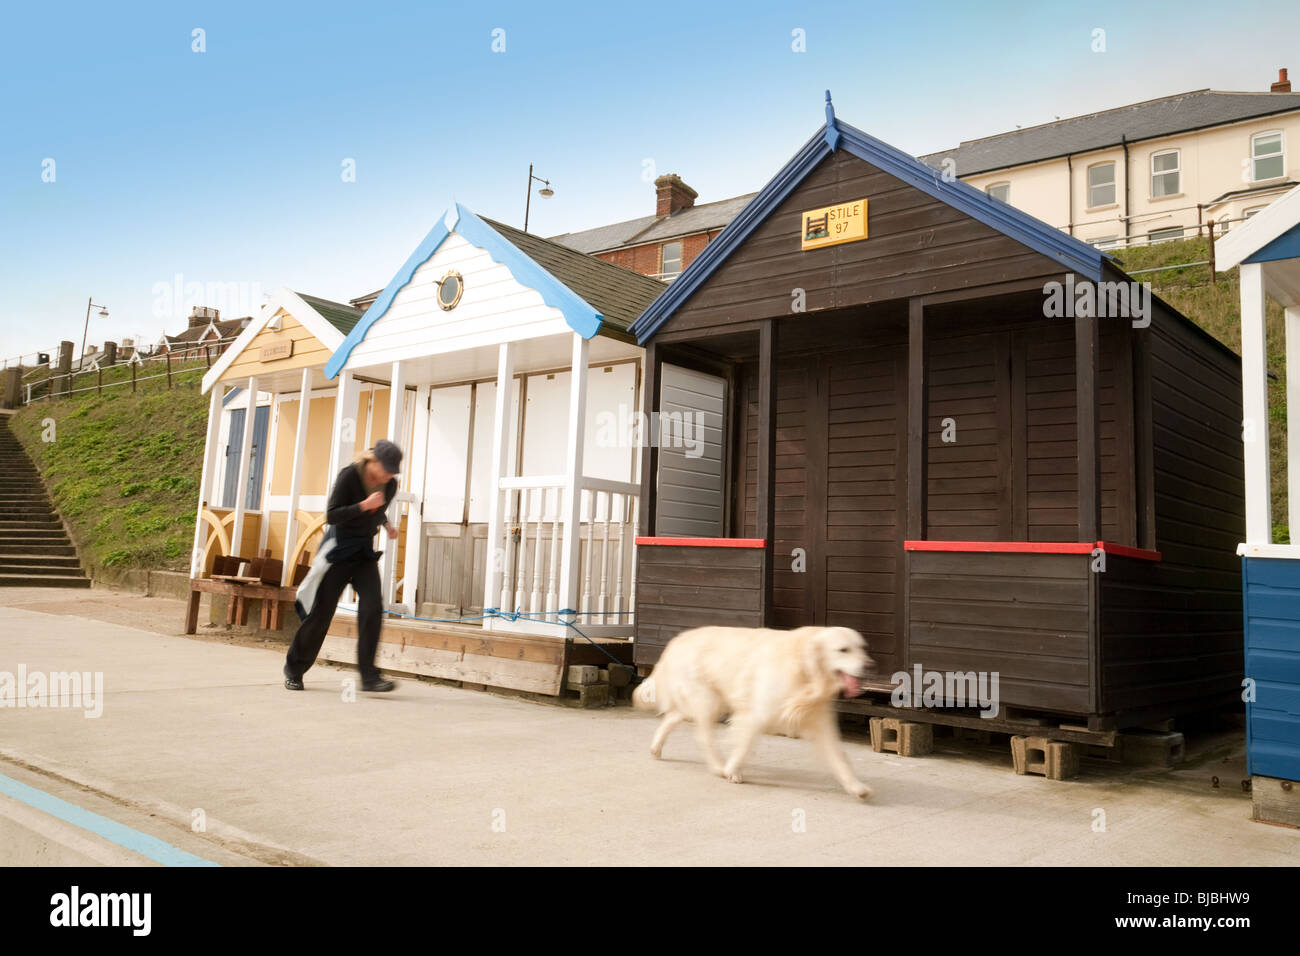 Jogging with the dog, the Promenade, Southwold, Suffolk, UK Stock Photo